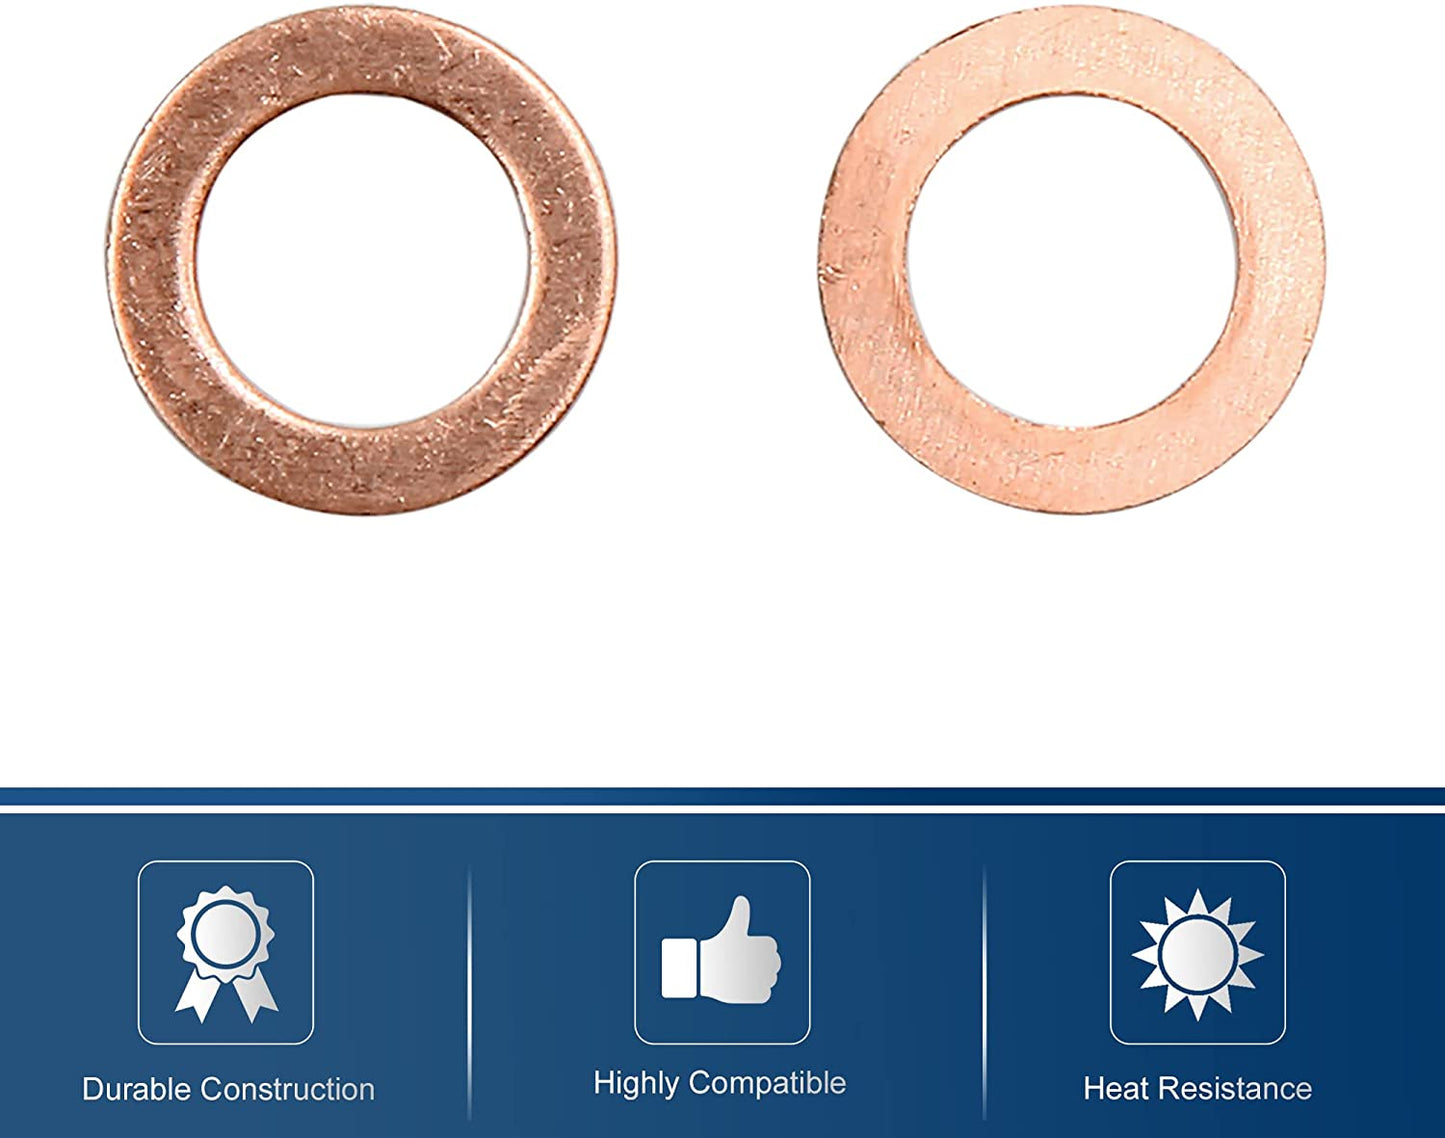 250pcs Metric M10x15x1mm Copper flat washer gasket Copper crush washer Sealing Ring for Screw Bolt Nut